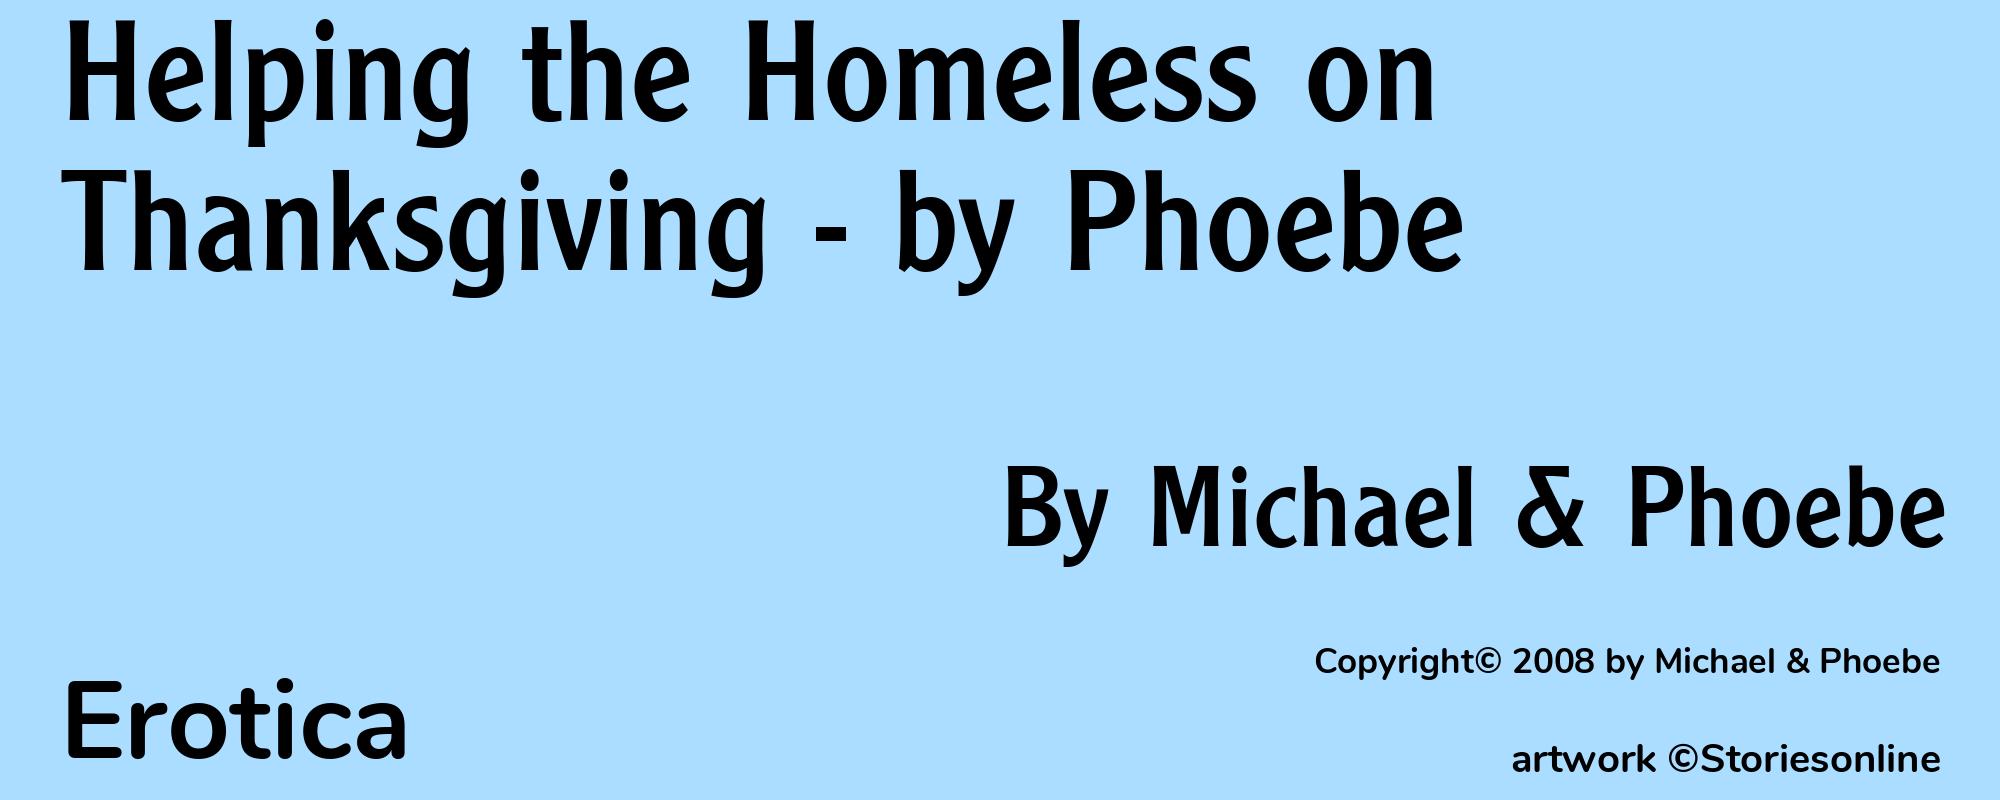 Helping the Homeless on Thanksgiving - by Phoebe - Cover